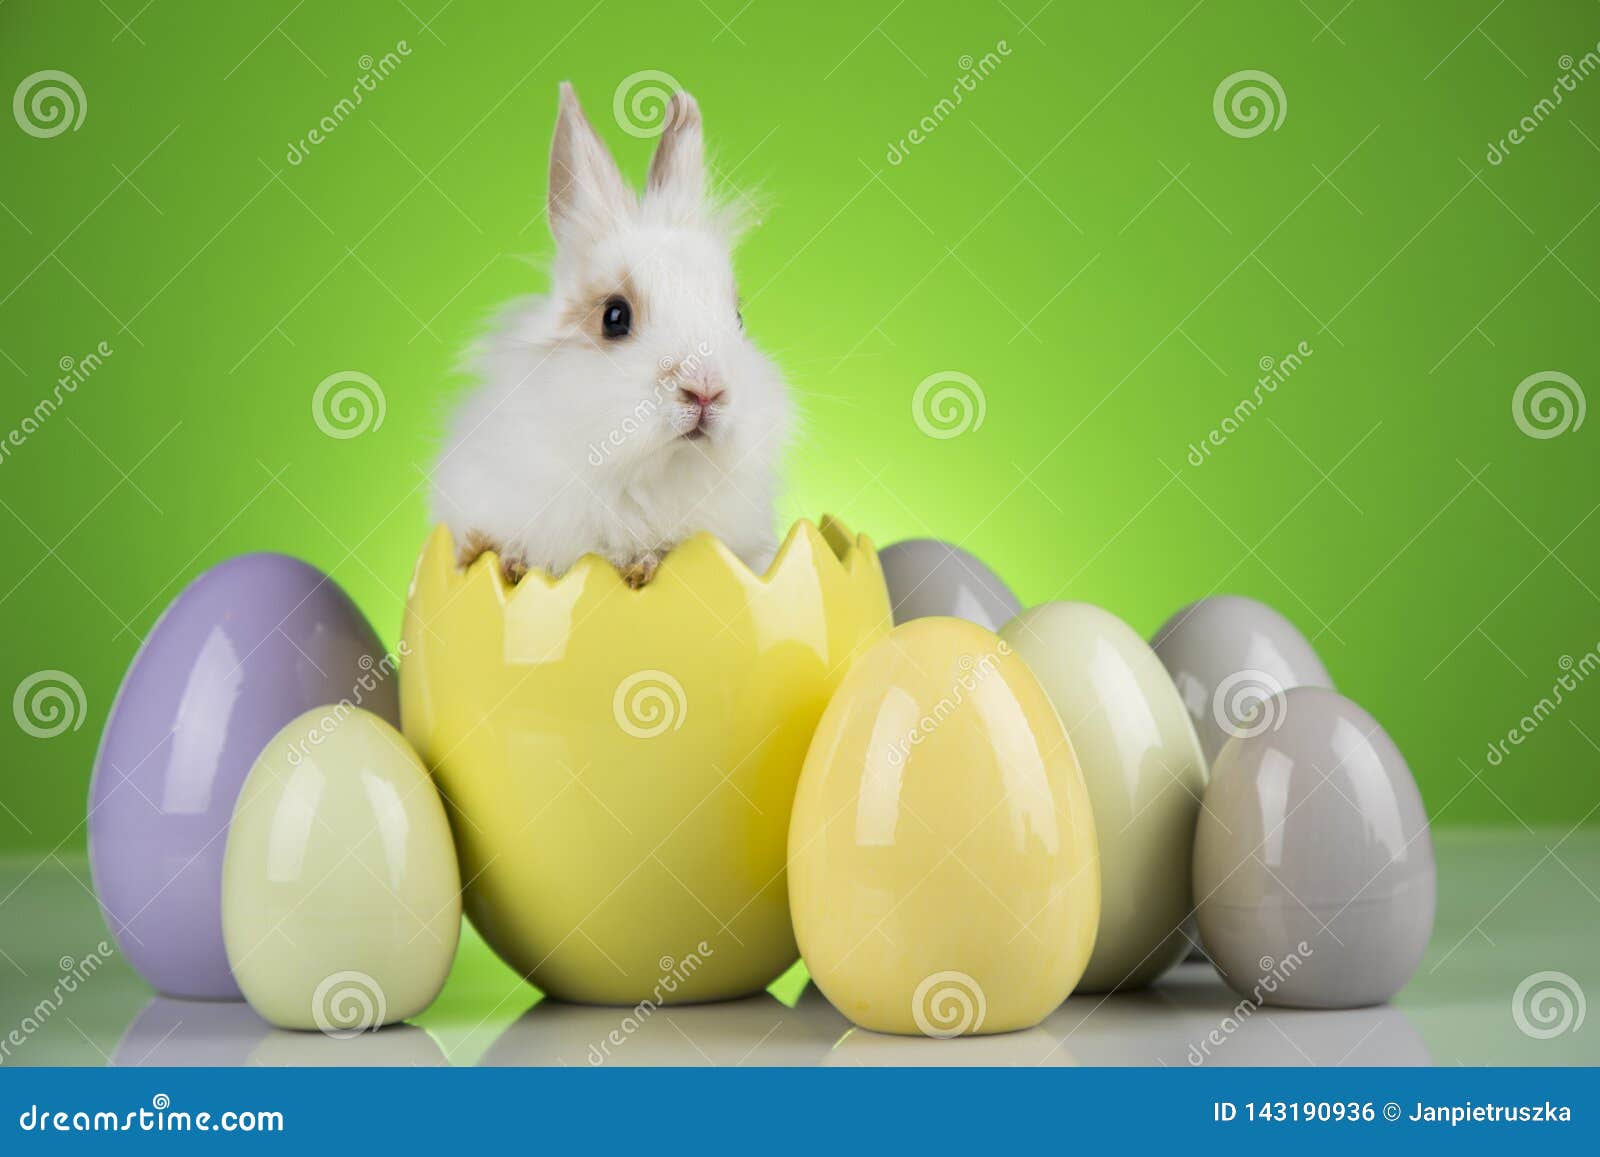 Bunny with Easter Eggs on Green Background Stock Photo - Image of cute ...